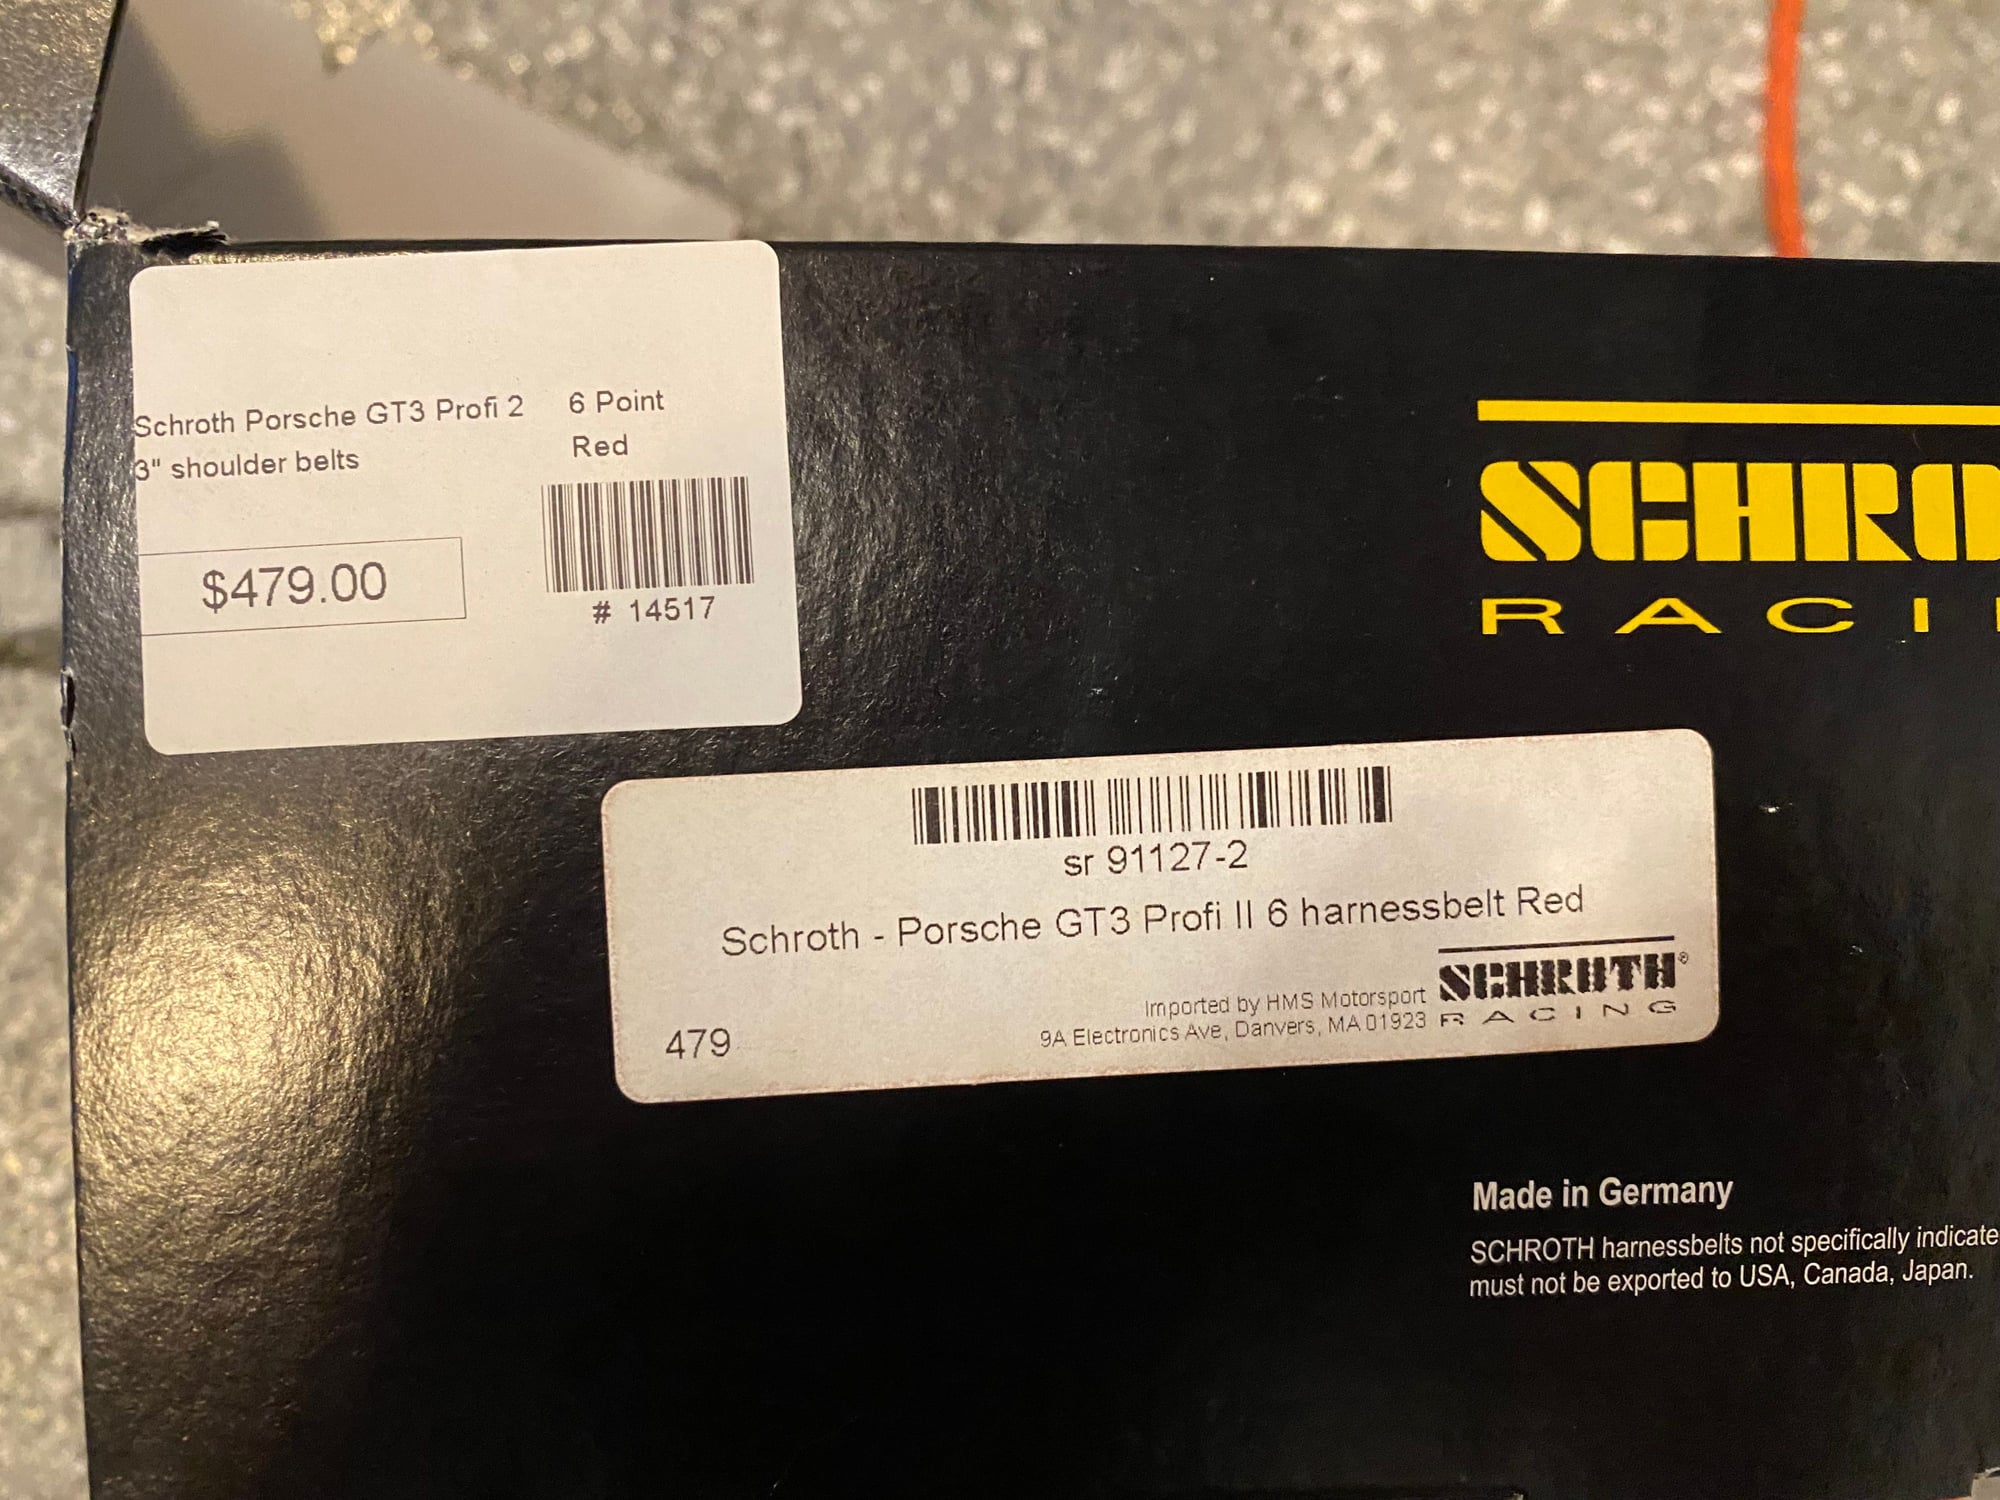 Interior/Upholstery - Schroth GT3 Profi 6 Point Harnesses - Used - 0  All Models - Denver, CO 80204, United States